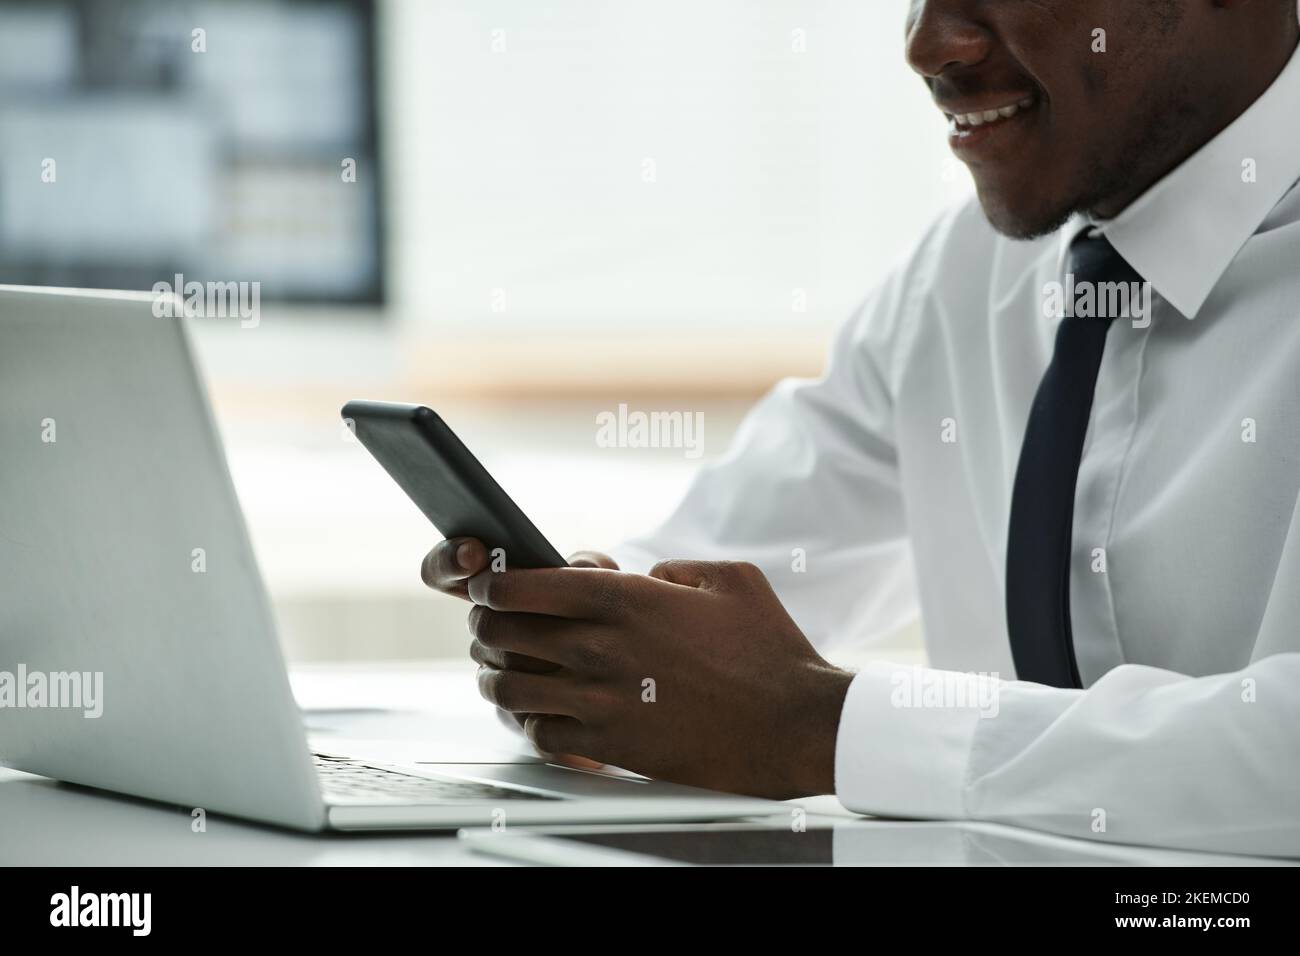 Close-up of African American businessman using smartphone and smiling while sitting at table in front of laptop Stock Photo